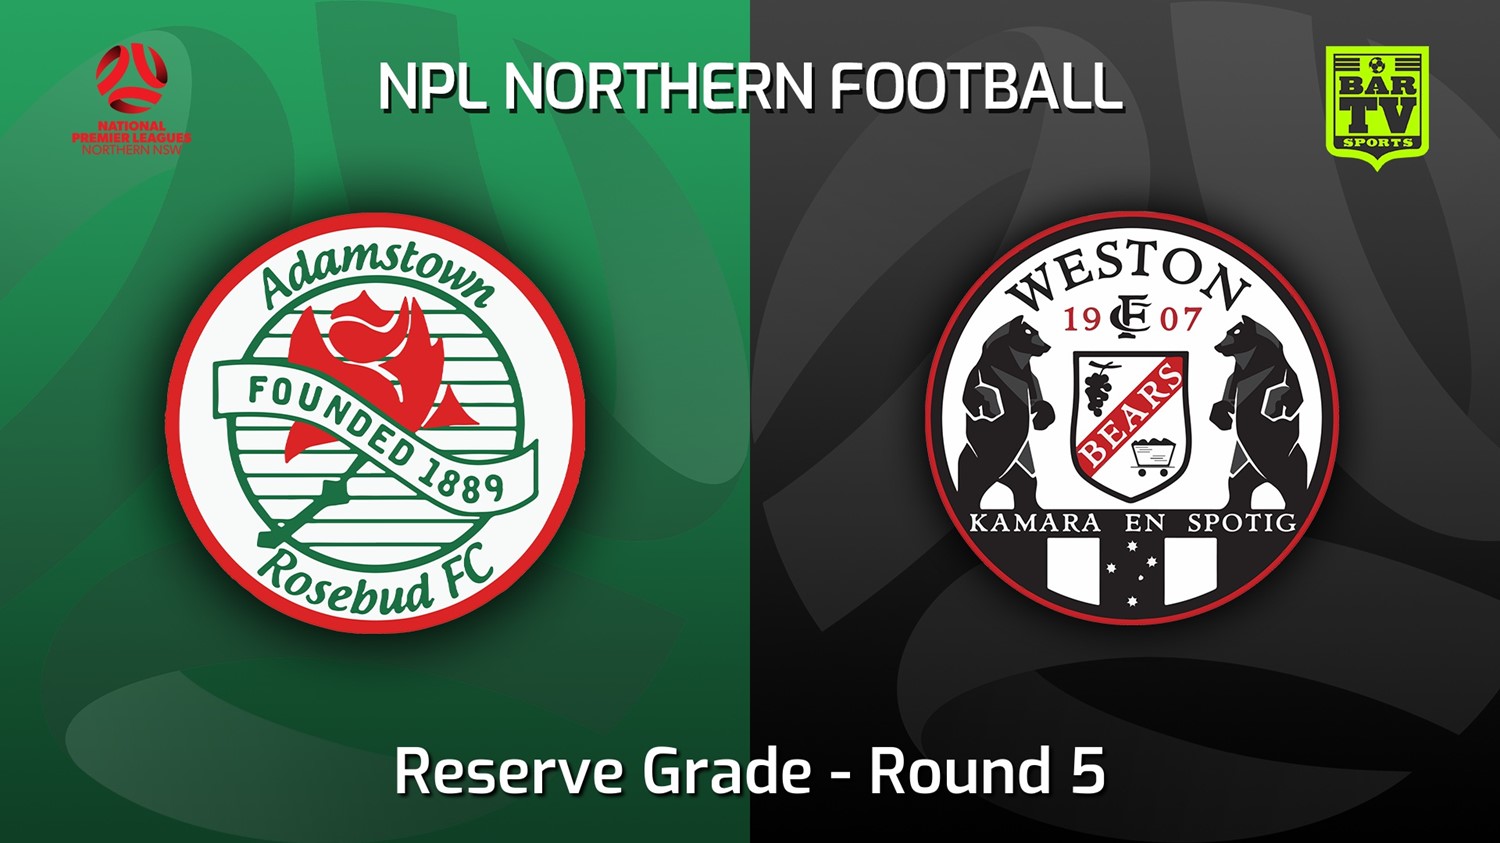 220505-NNSW NPLM Res Round 5 - Adamstown Rosebud FC Res v Weston Workers FC Res Minigame Slate Image